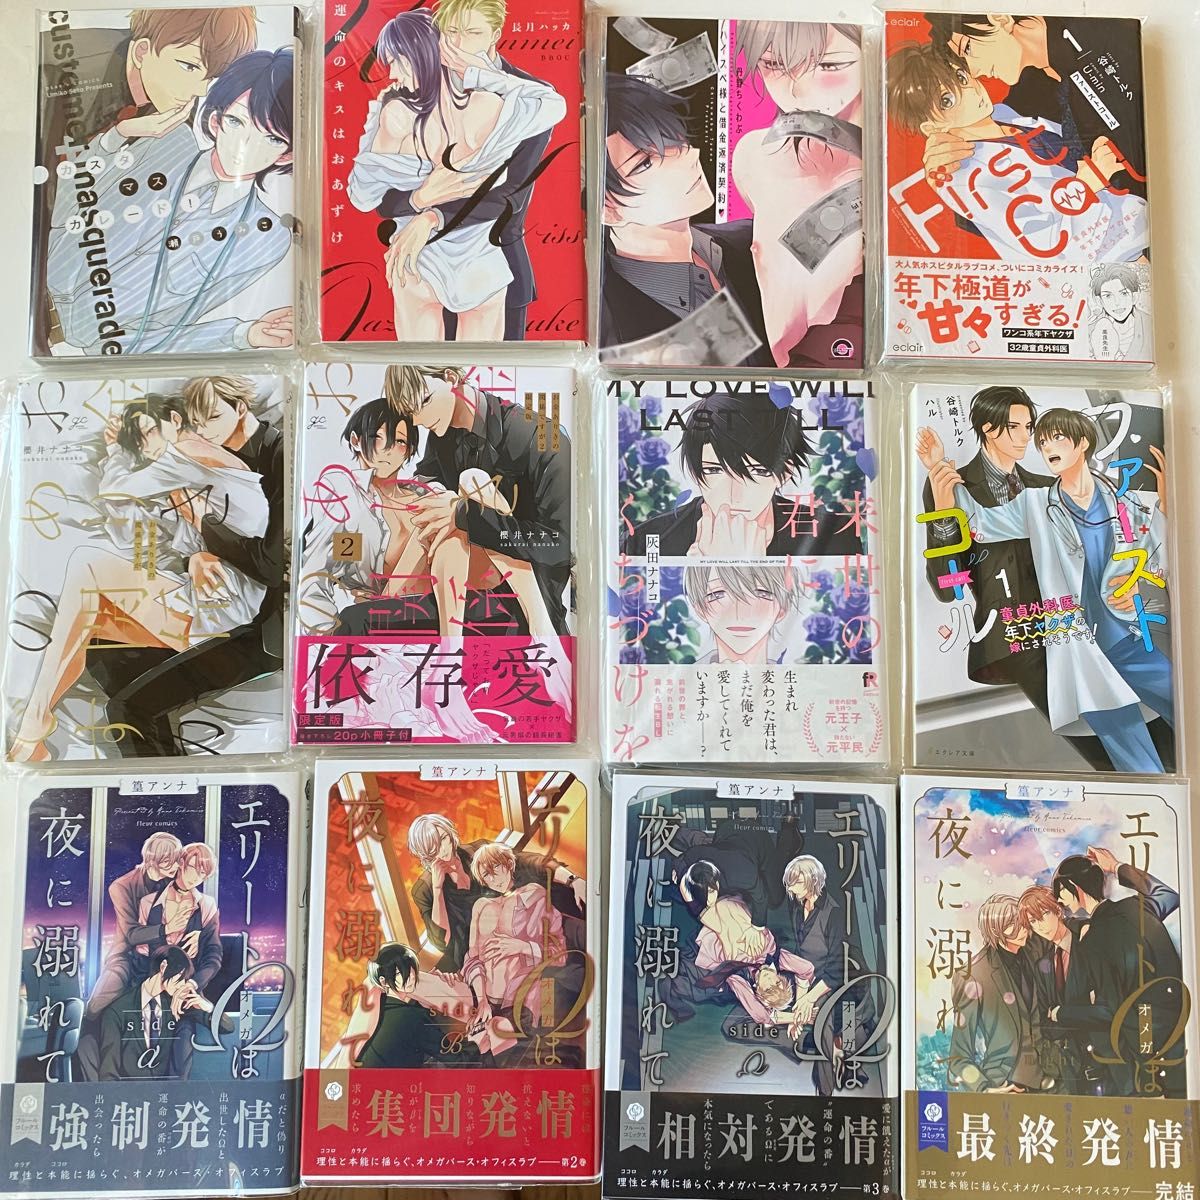 BL 漫画 コミック×11 小説×1 12冊セット ボーイズラブ  女性漫画 大人向けコミックス